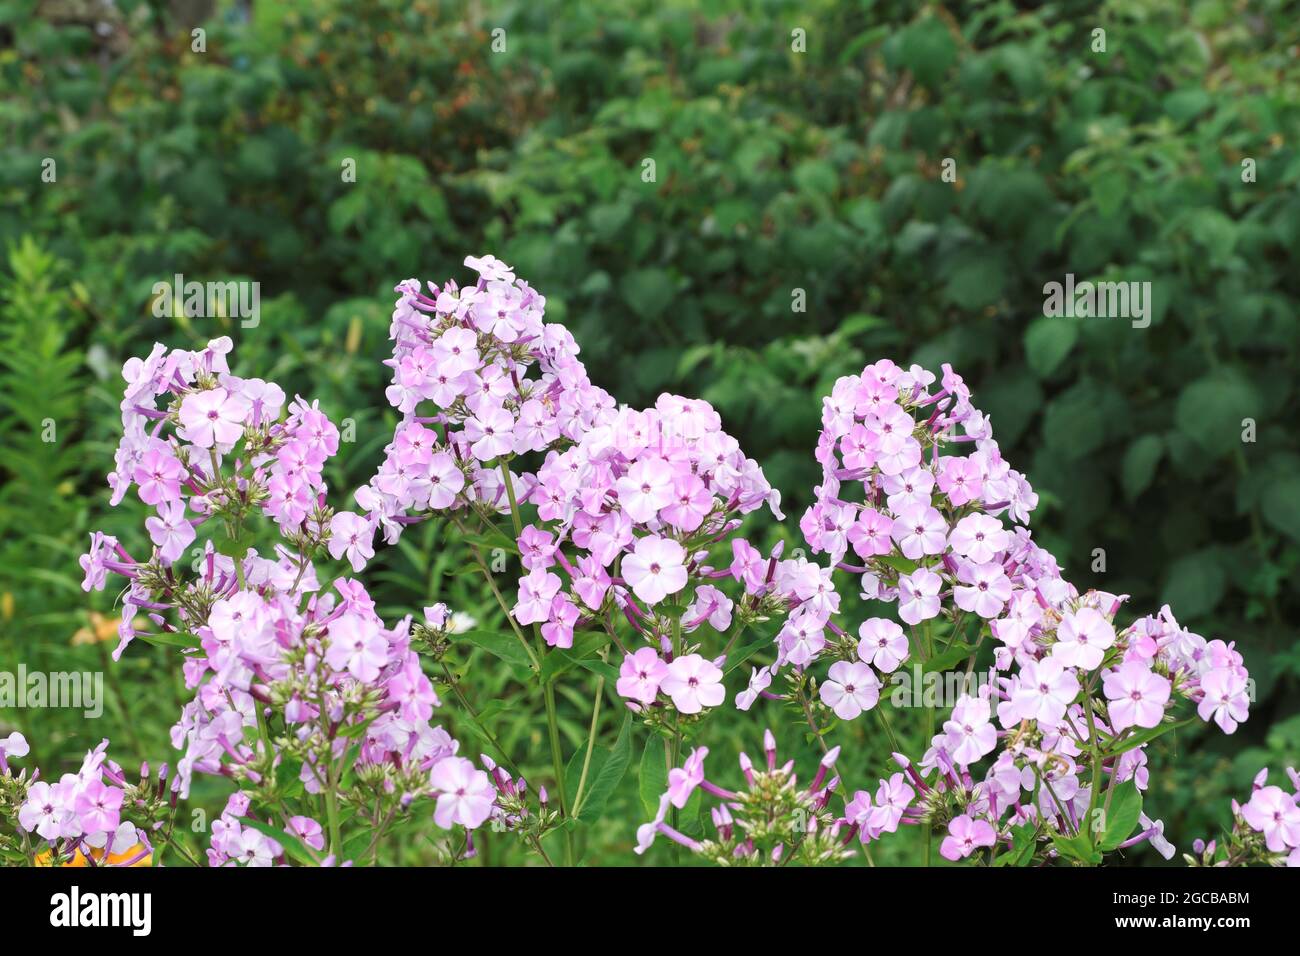 Phlox paniculata. Gorgeous bright pink and purple flower buds on a background of green grass. Selective focus. Stock Photo